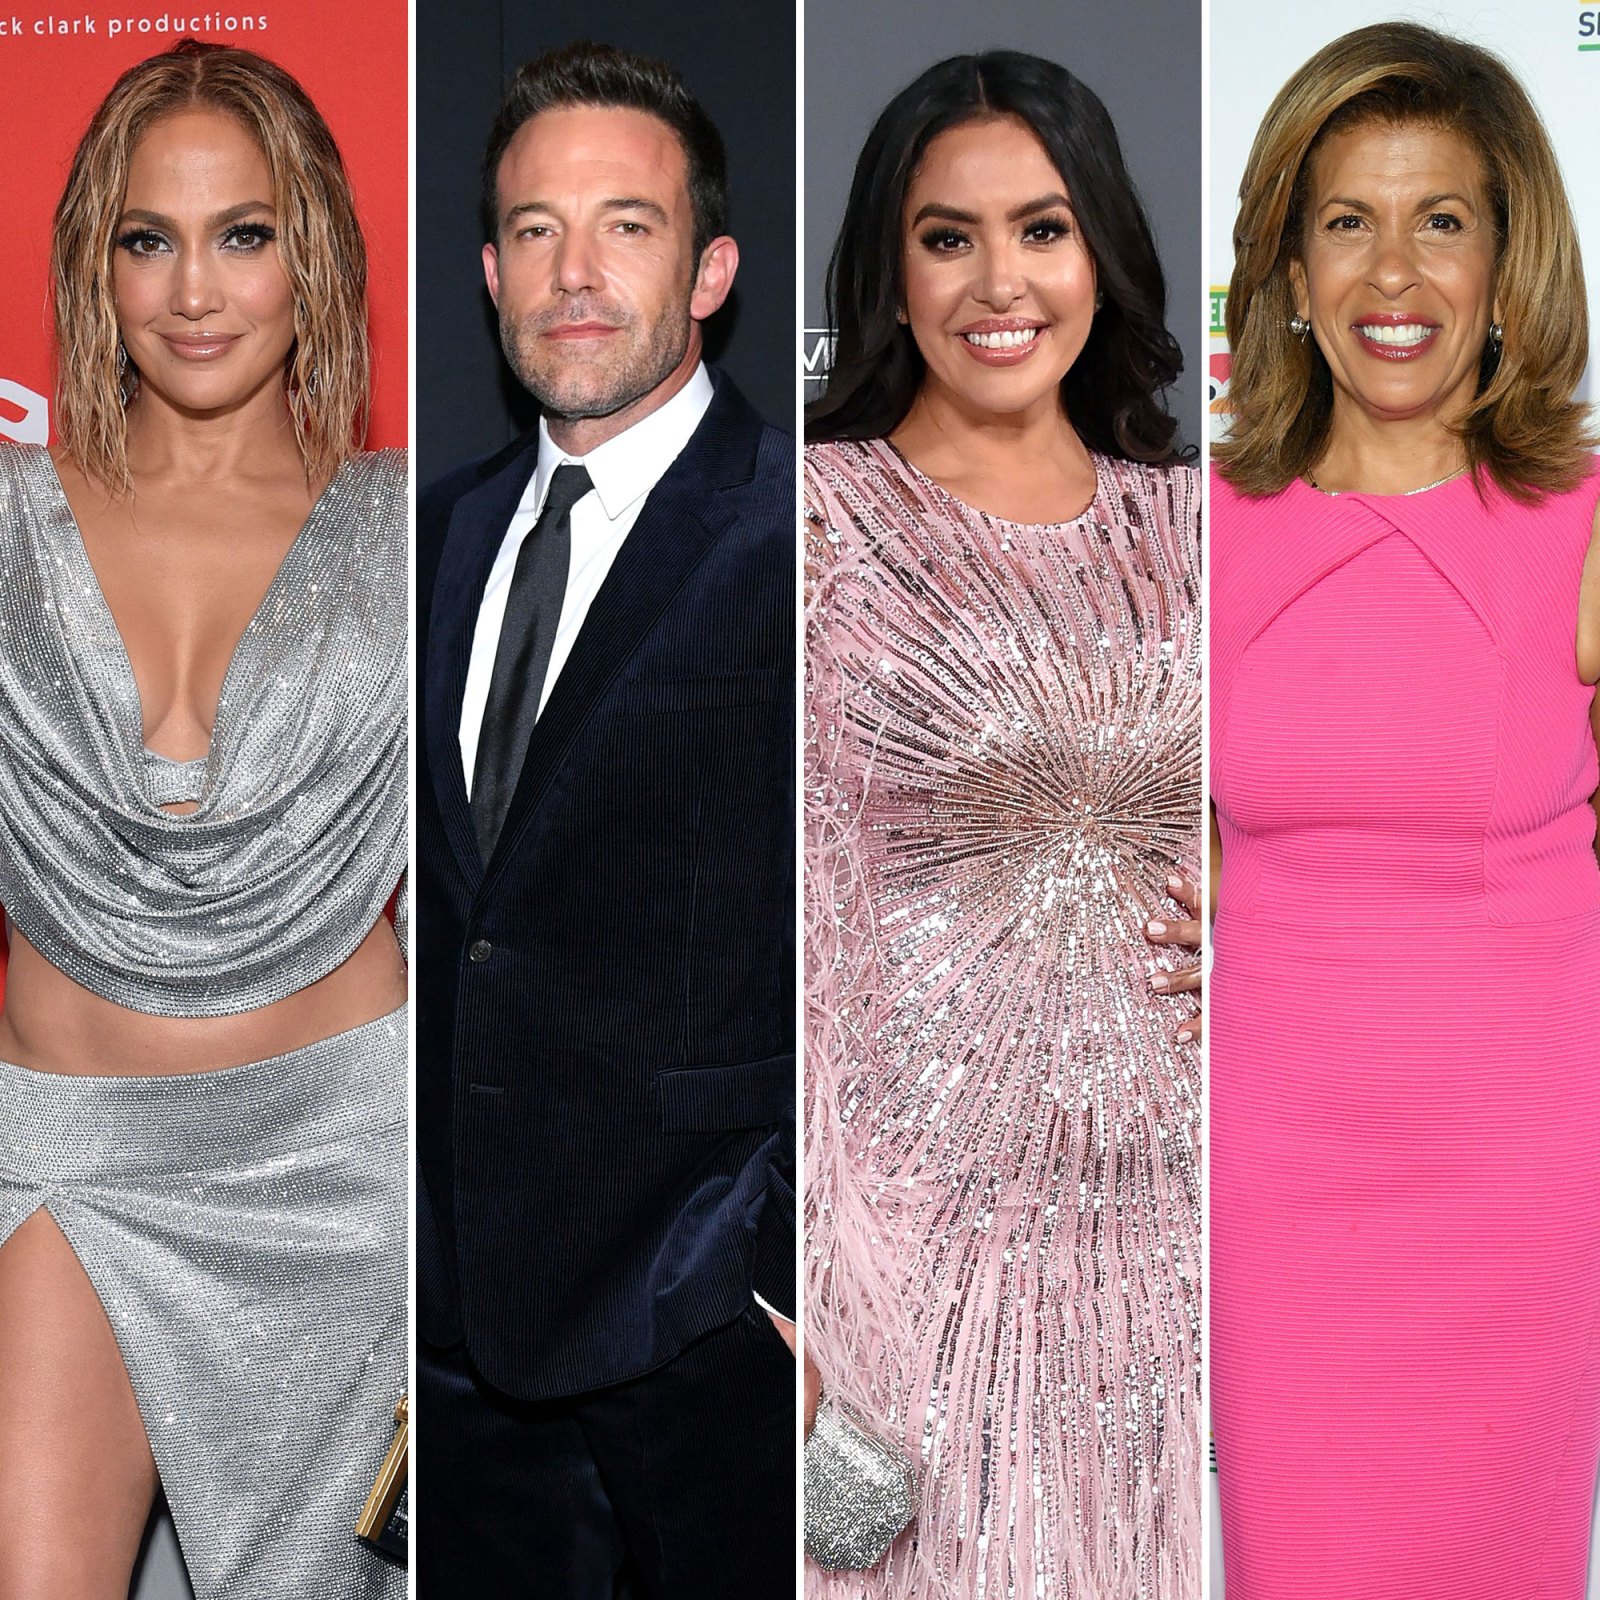 Jennifer Lopez and Ben Affleck Are Married: Vanessa Bryant Hoda Kotb and More Stars React